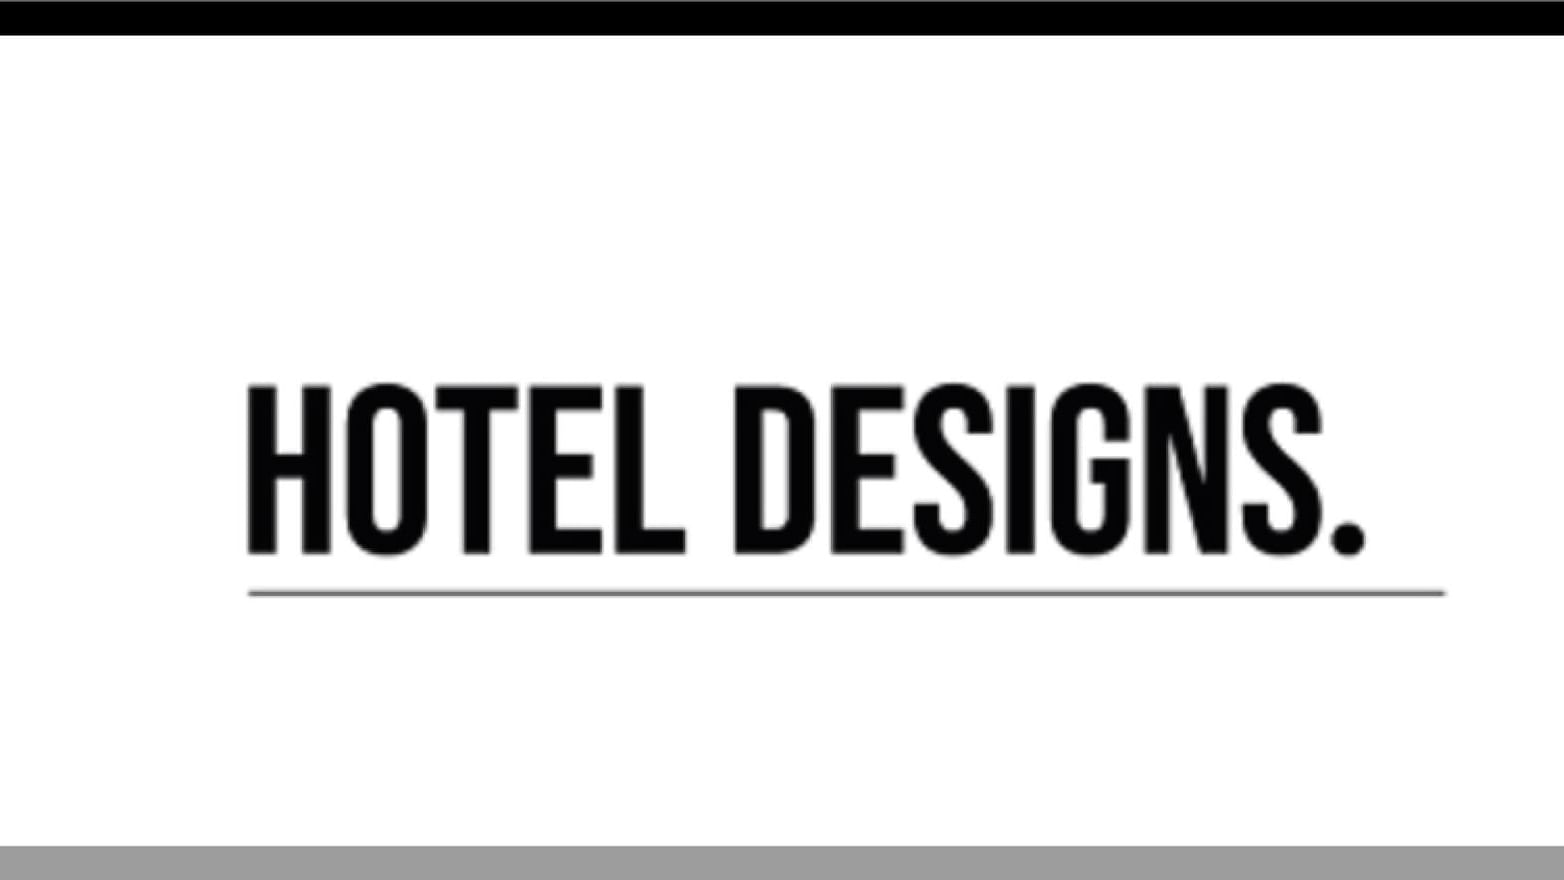 The Logo of Hotel Designs used at The Londoner Hotel